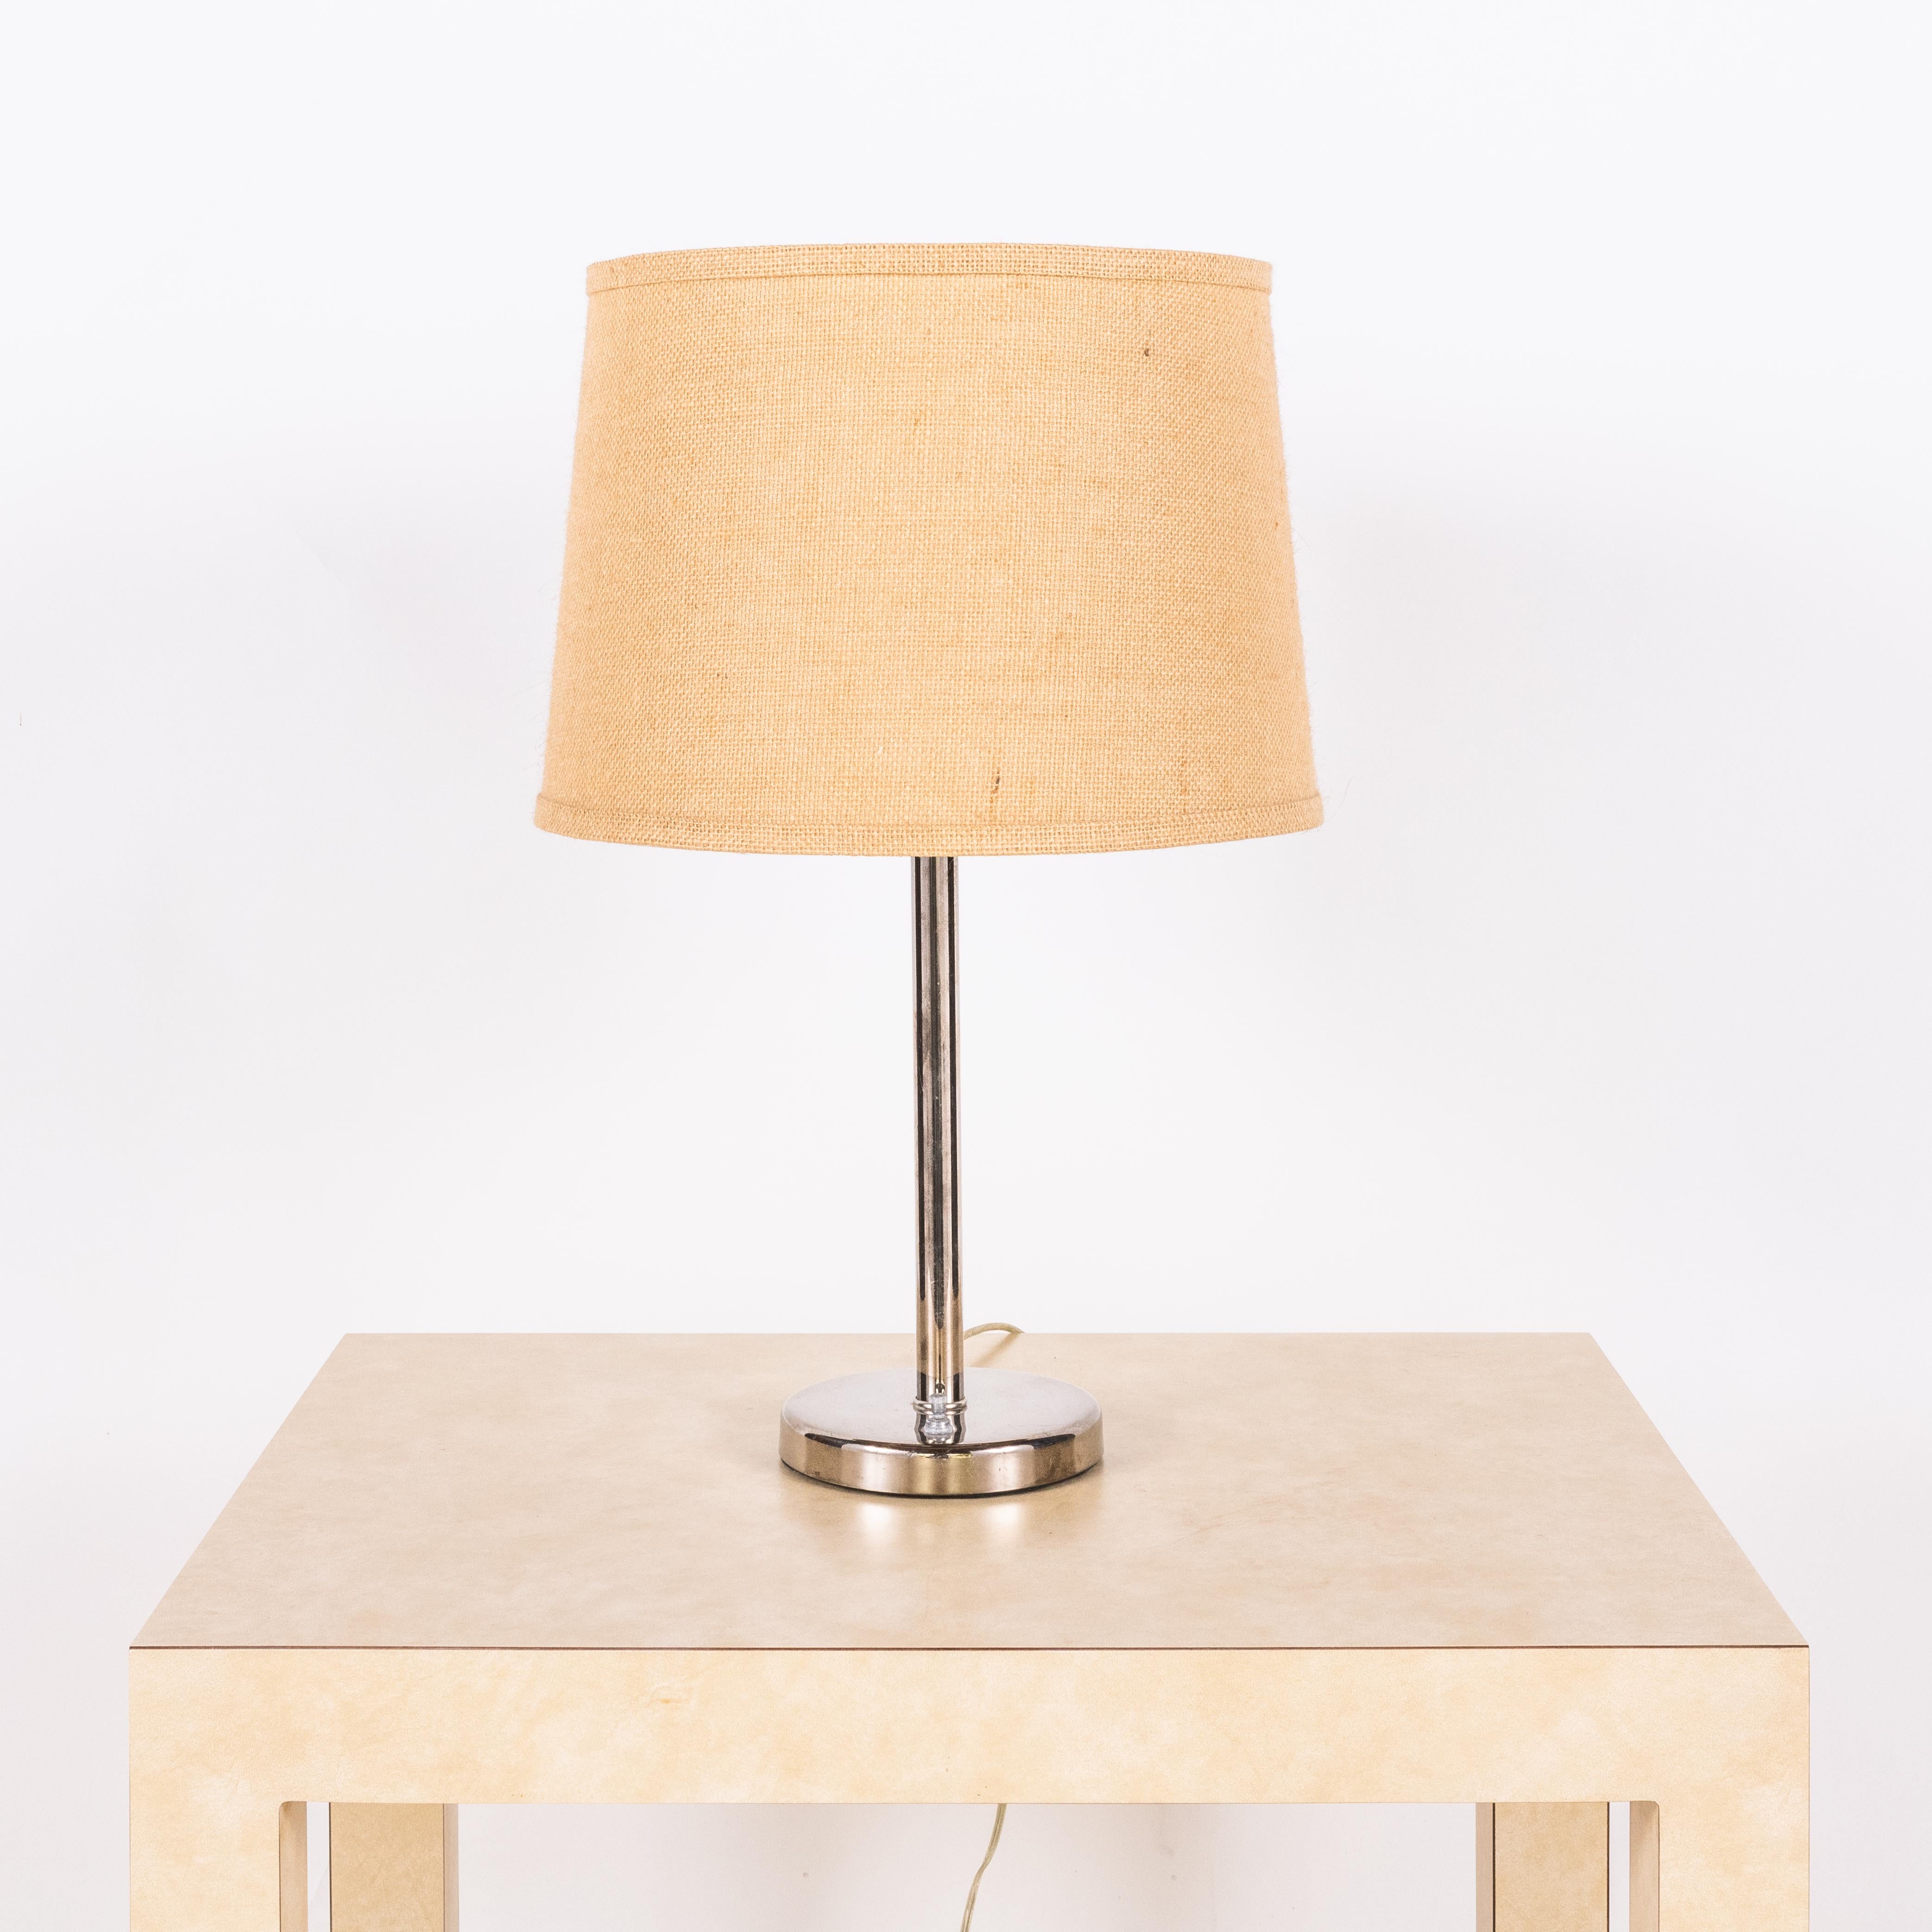 Chrome lamp with burlap shade by Nessen Lighting.

Dimensions listed (14 in. diameter x 22 in. tall) are the overall dimensions of the lamp with the shade.